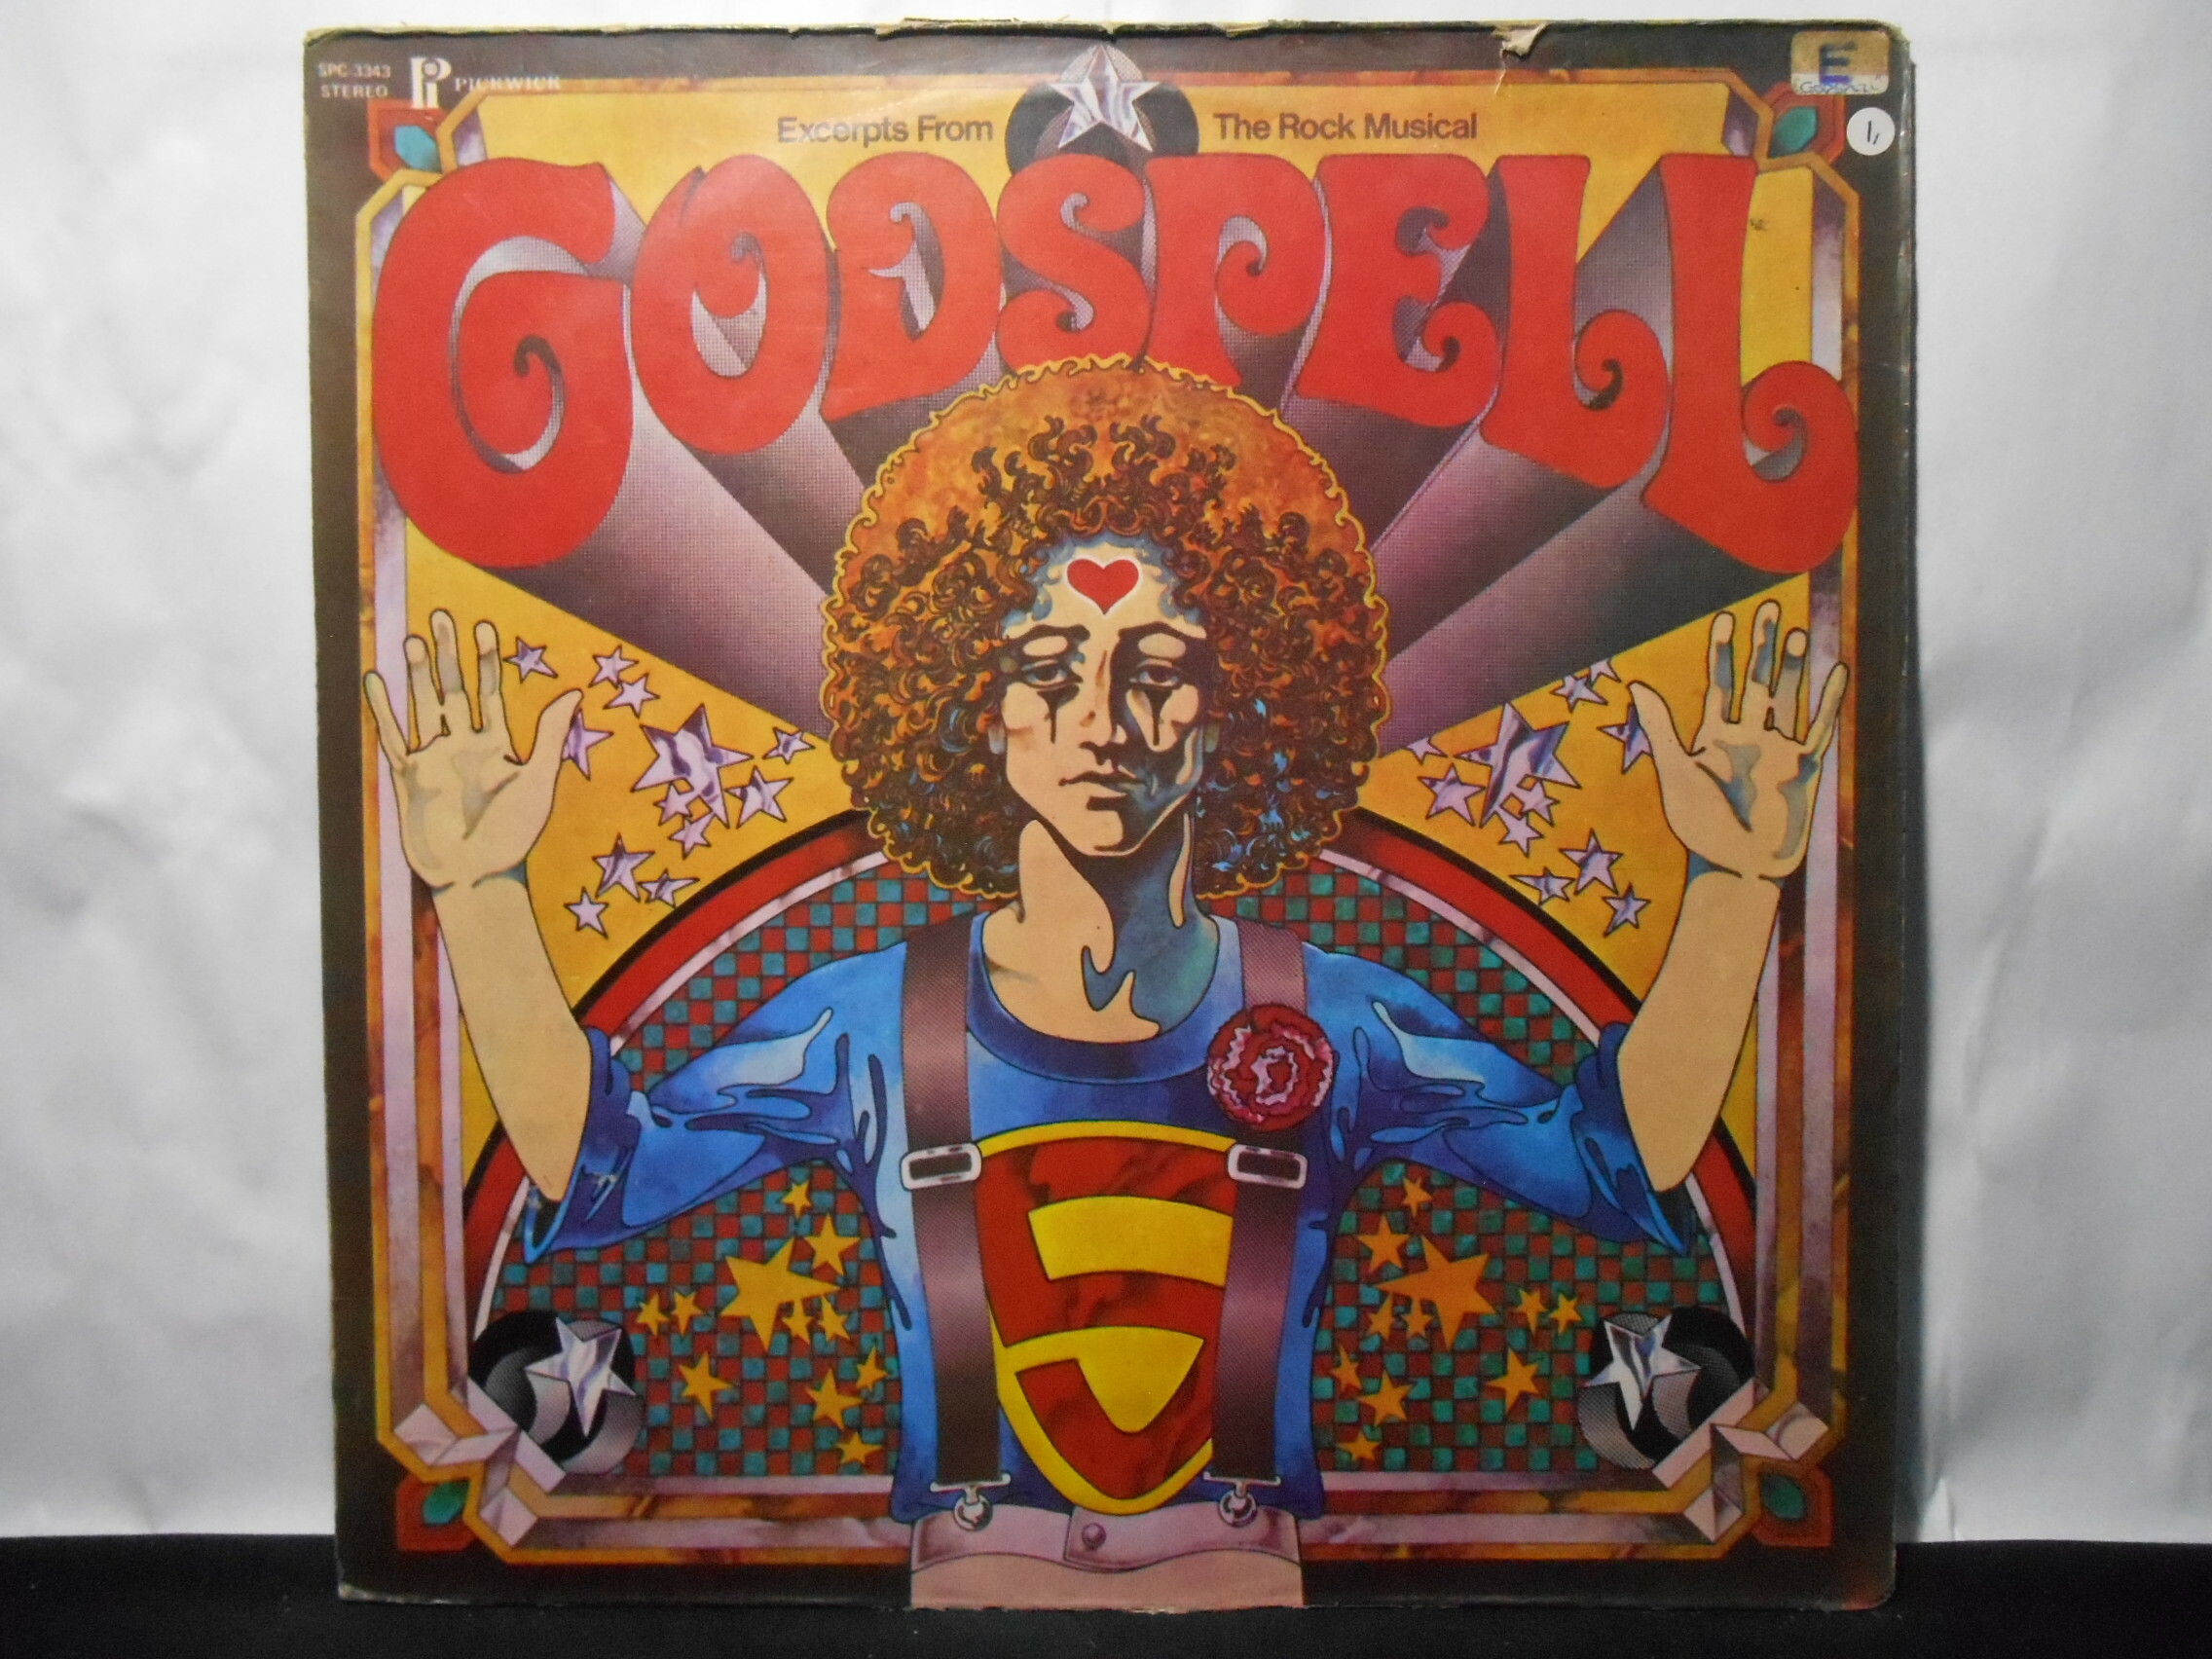 Vinil - Bruce Baxter Orchestra and Chorus - Excerpts From The Rock Musical Godspell